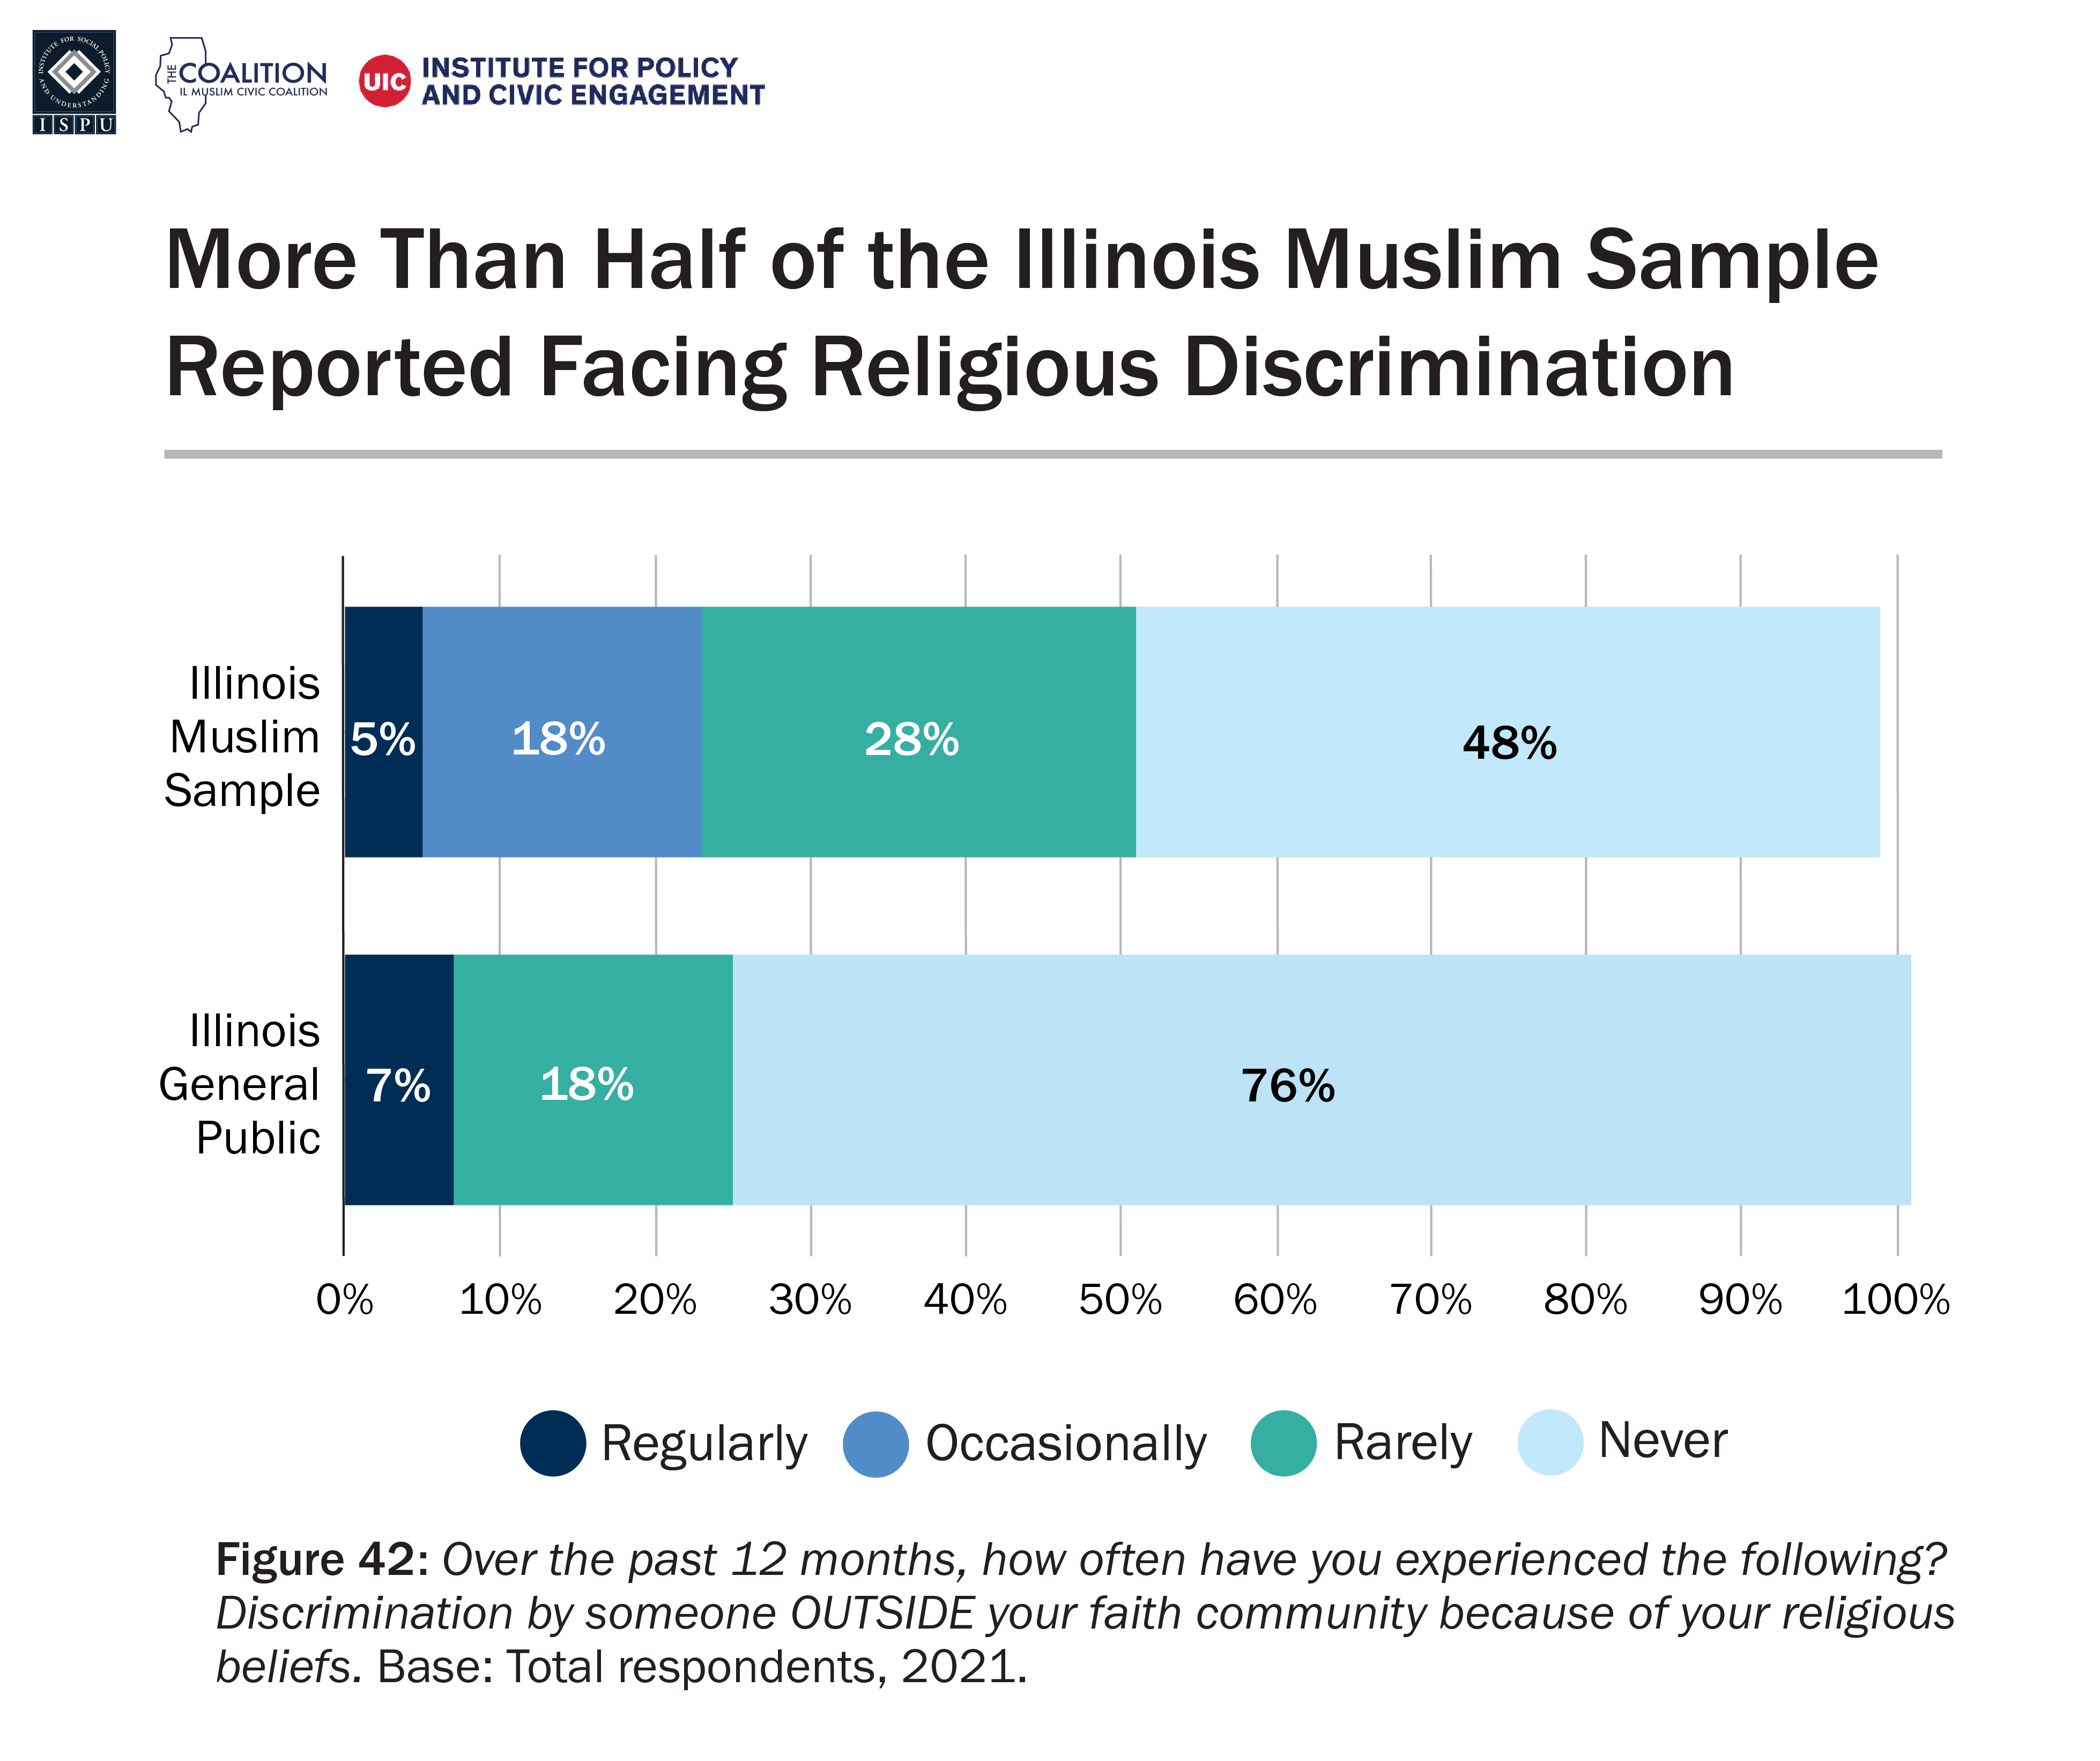 A bar graph showing frequency of religious discrimination by someone outside faith community among the Illinois Muslim sample and Illinois general public